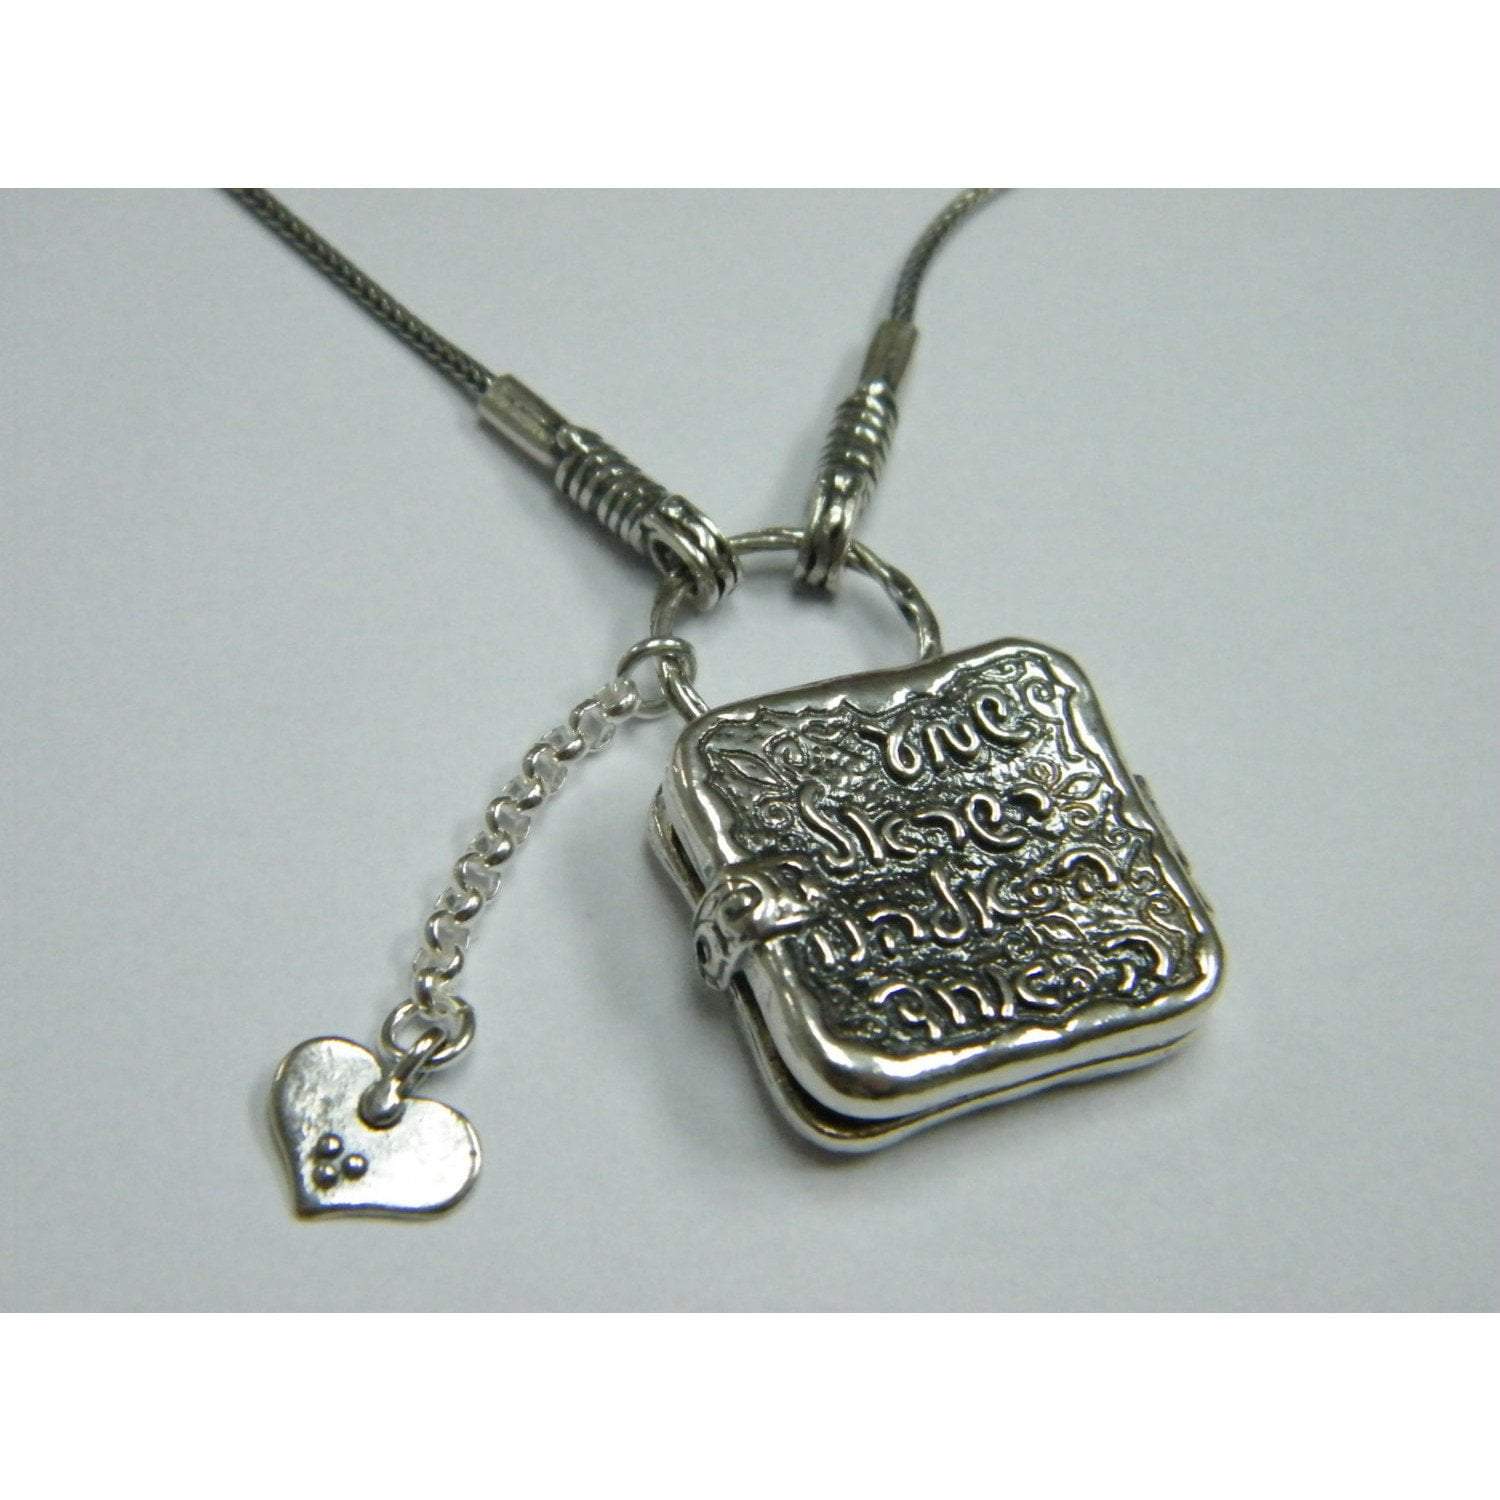 Bluenoemi Jewelry Necklaces 45cm / silver Sterling Silver necklace locket engraved with Shma Israel Prayer with a charm heart adorable jewelry